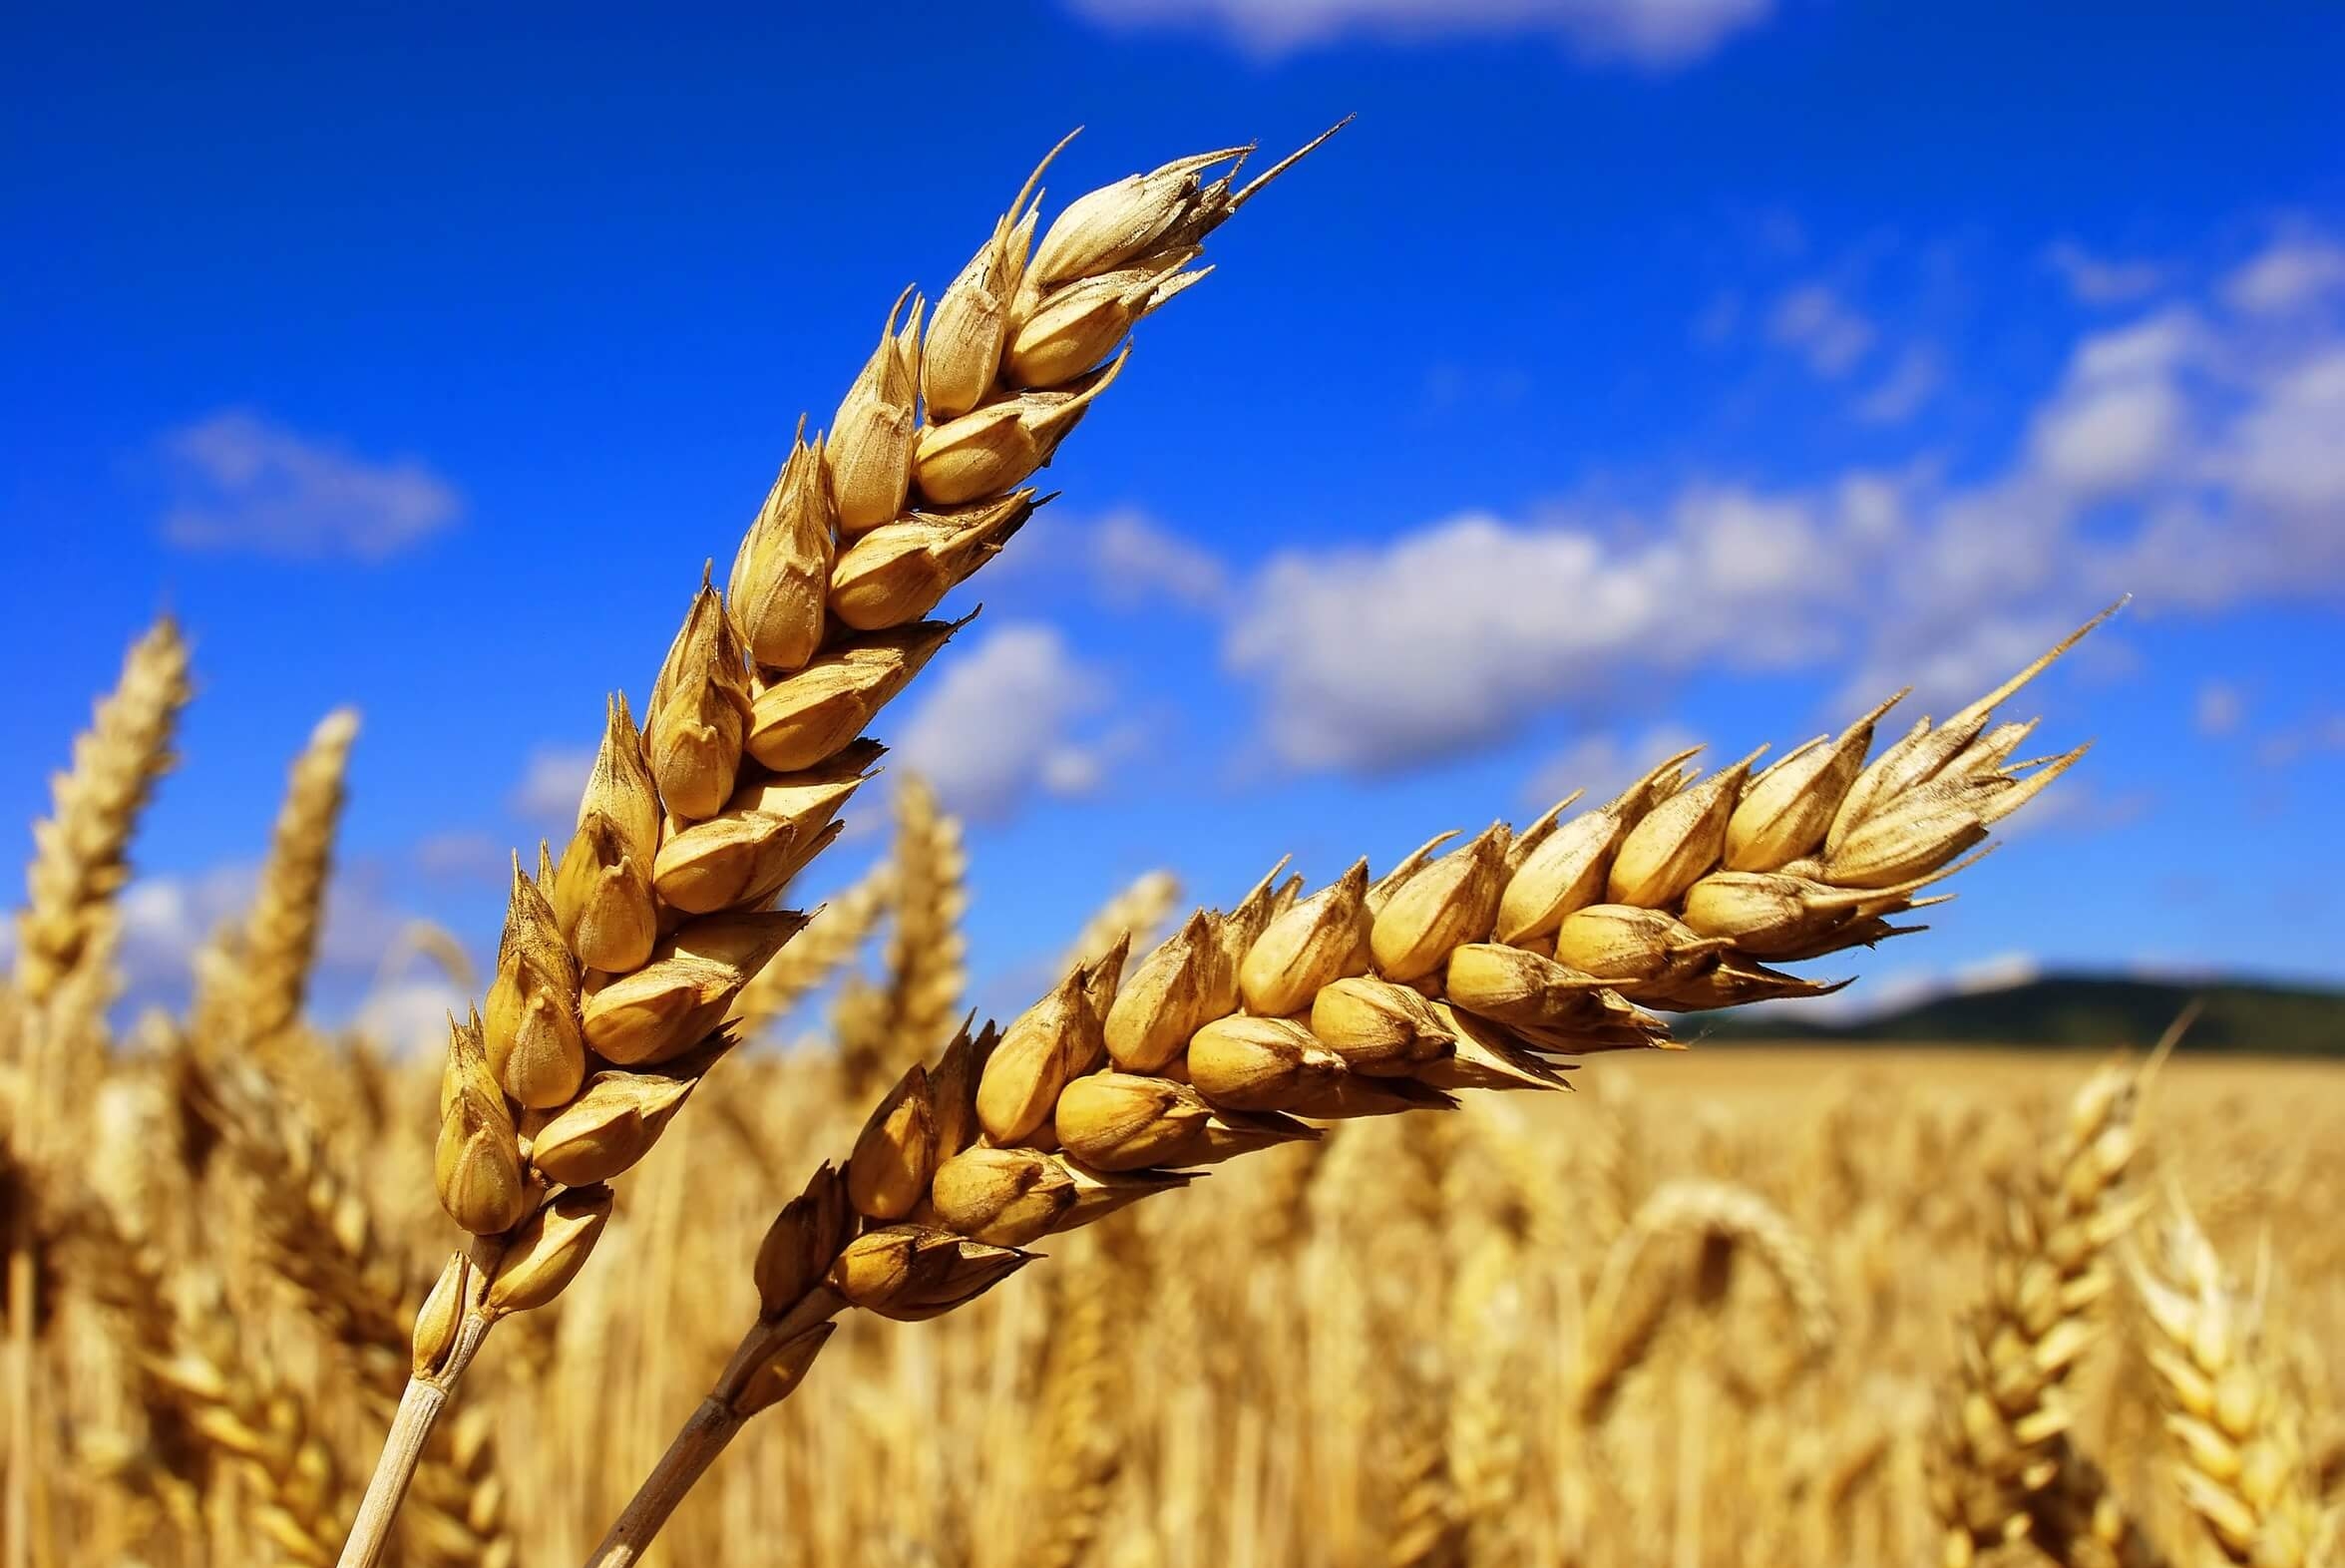 Wheat futures on Euronext rose to a 14-month high, supporting prices in Ukraine